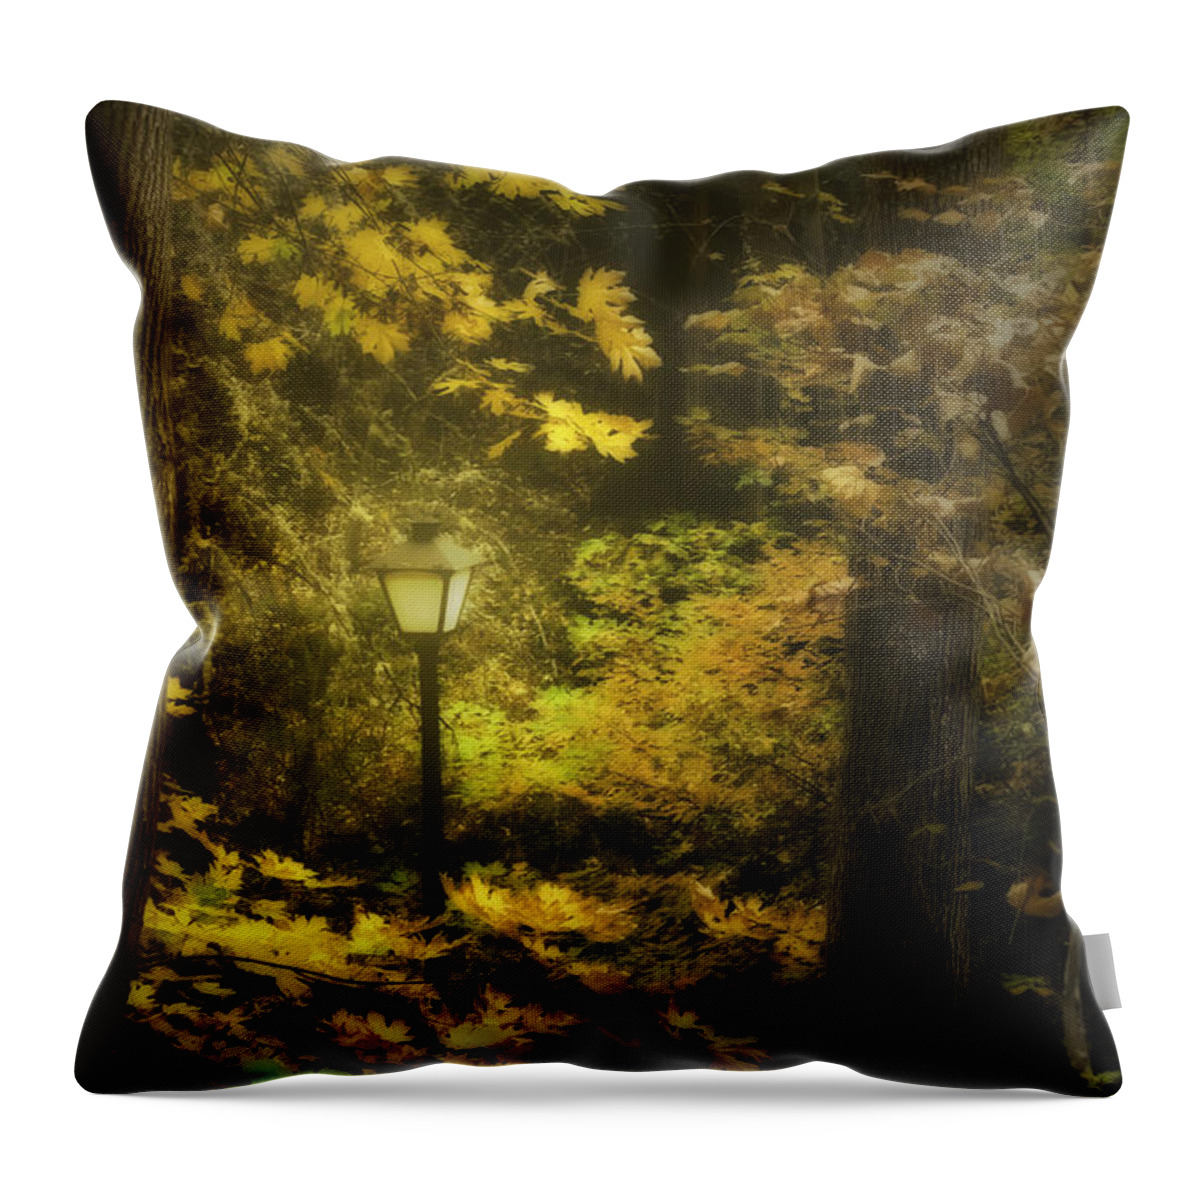 Light Throw Pillow featuring the photograph A Light In the Autumnal Forest by Diane Schuster